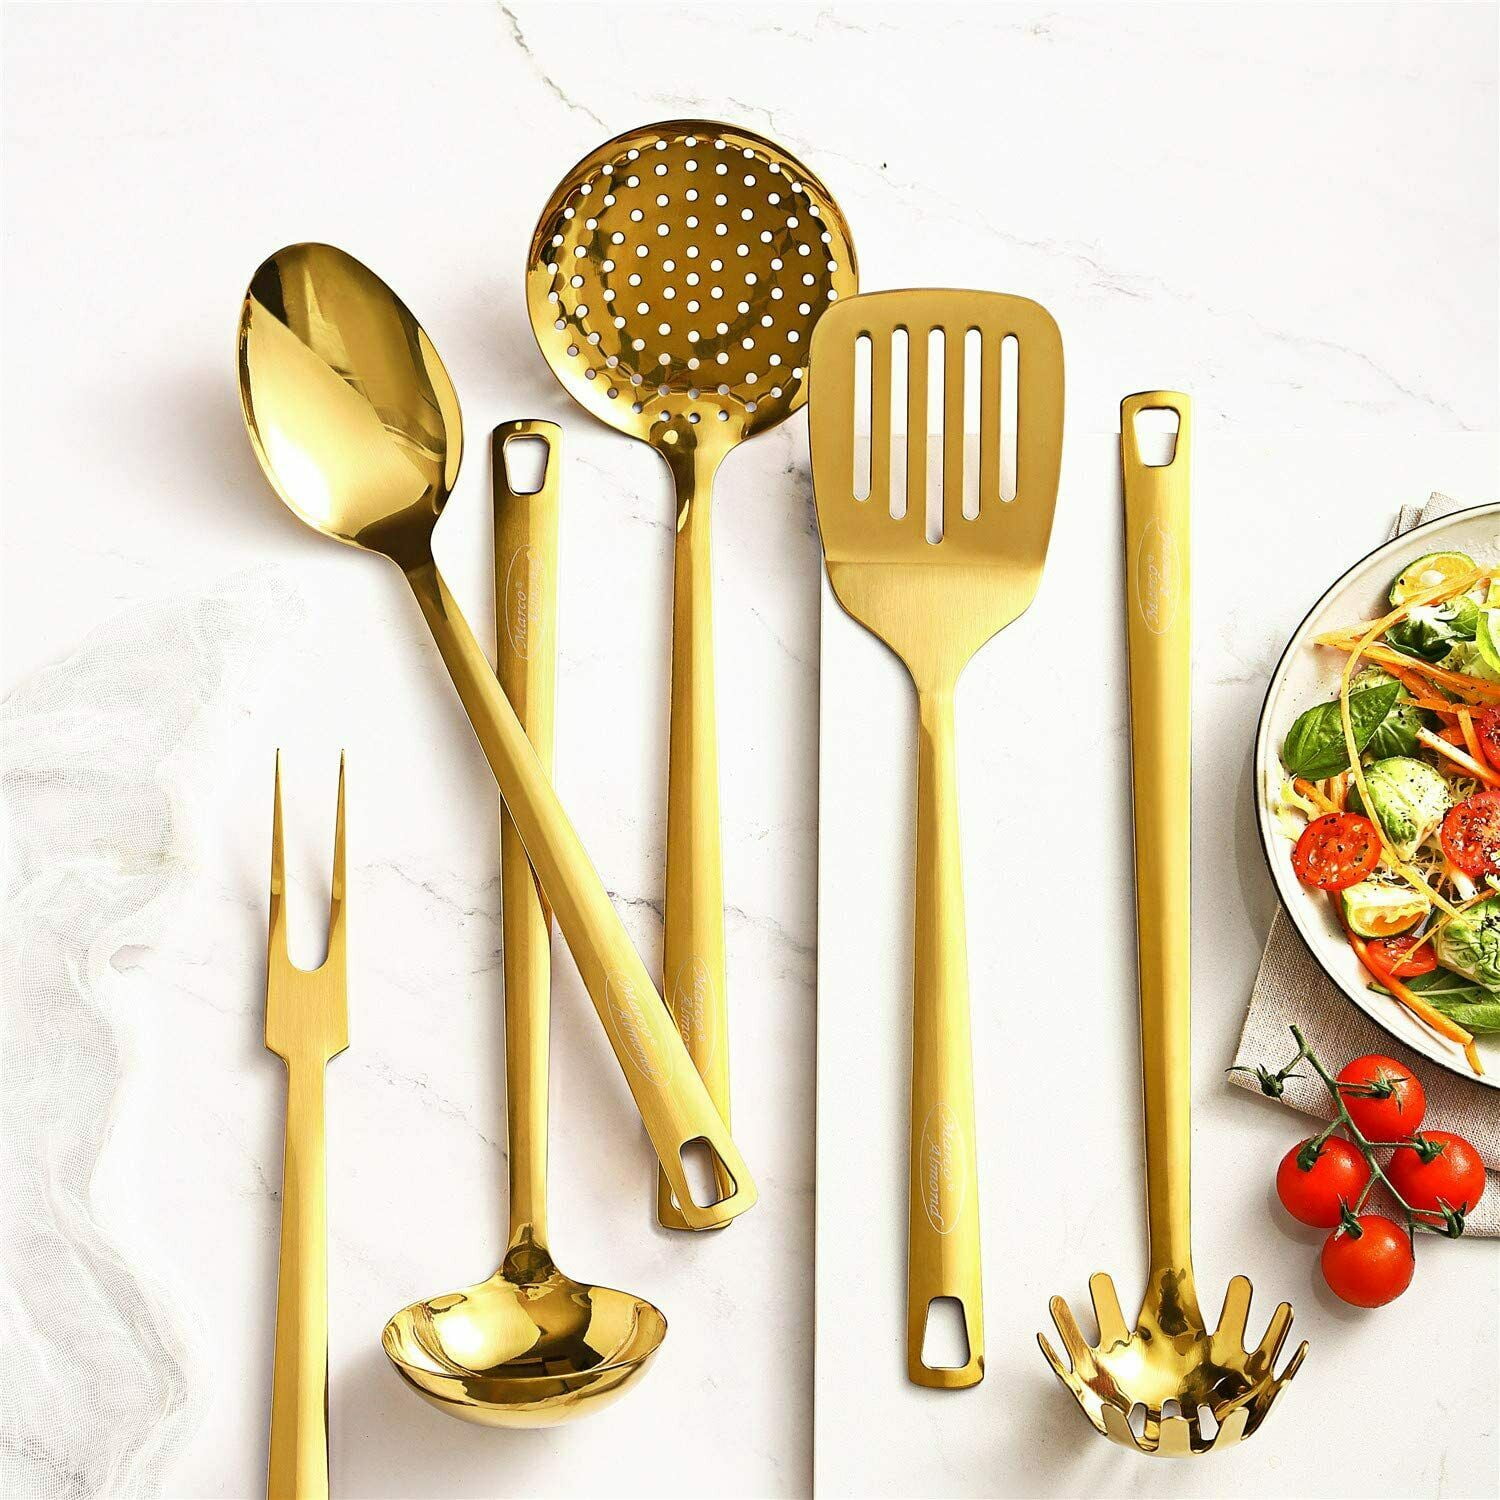 Stainless Steel Kitchenware Seven Pieces Set (White Gold).Cooking Utensils  7 Pcs